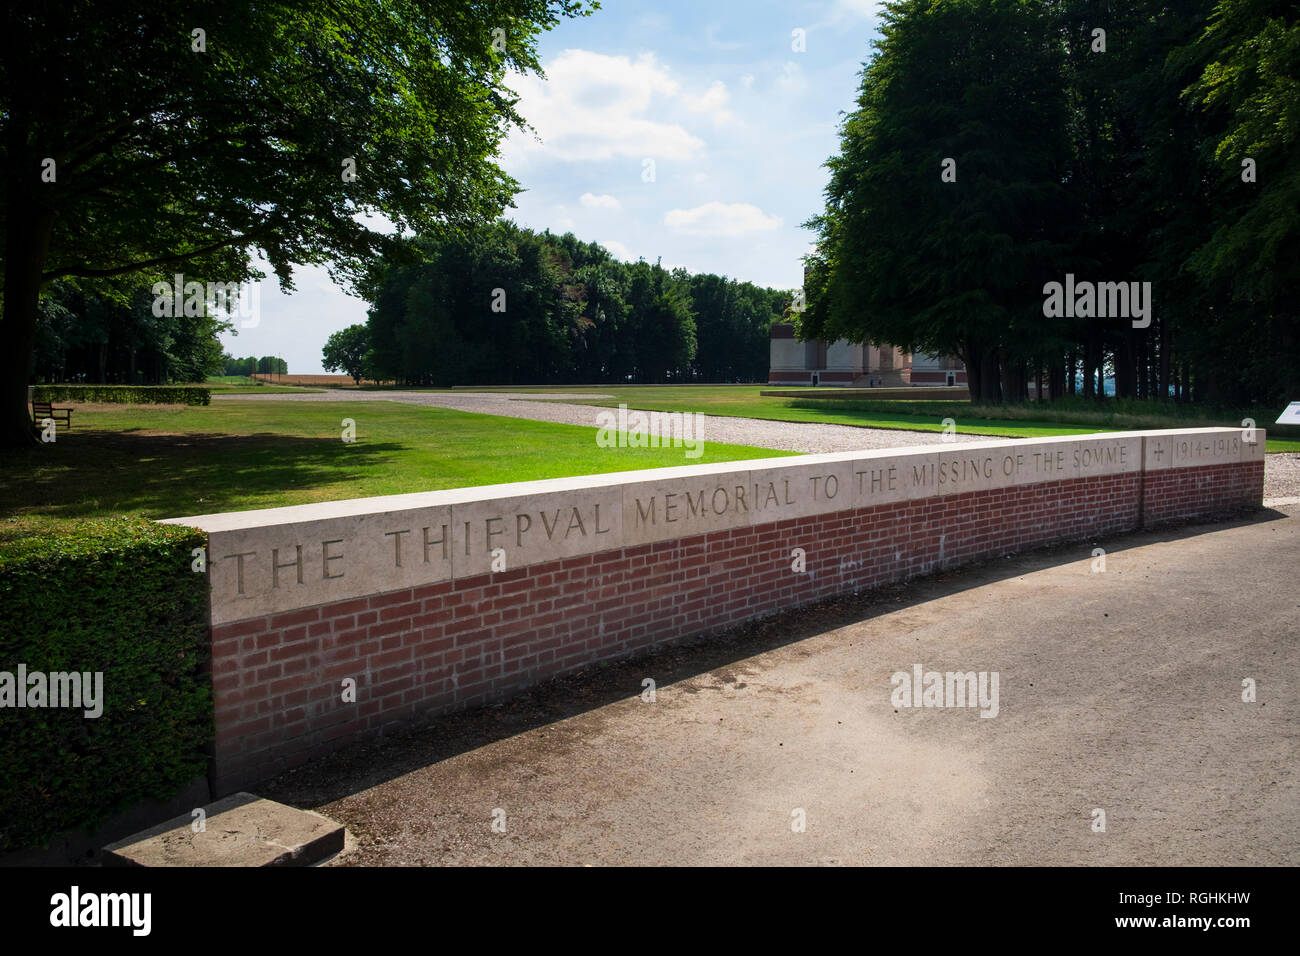 The Thiepval Memorial to the Missing of the Somme in World War 1 Stock Photo